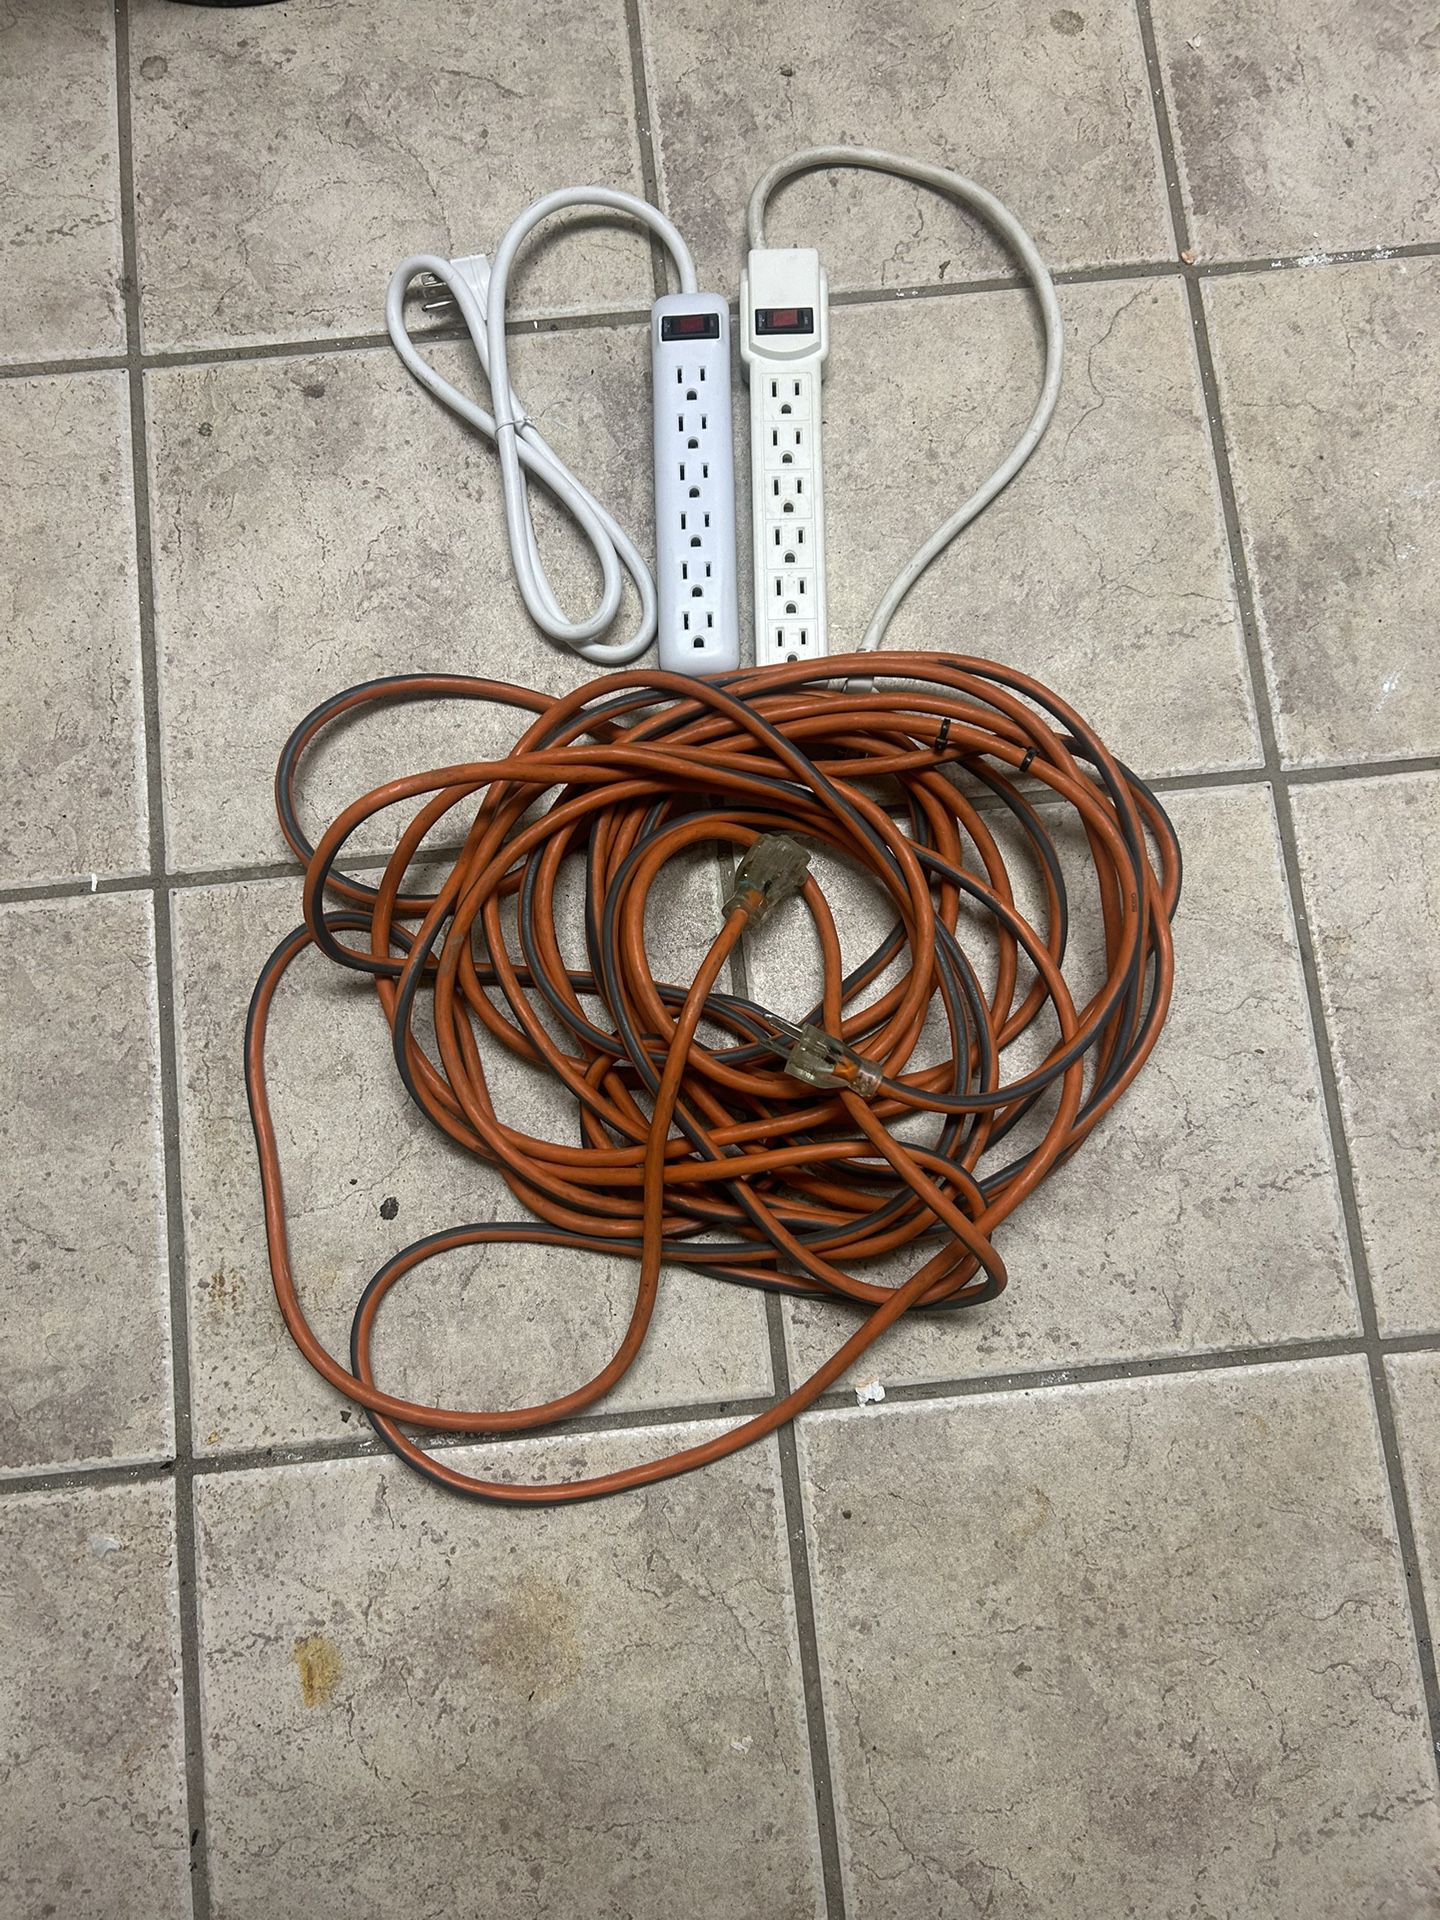 Multiple Outlet Power Strips. 